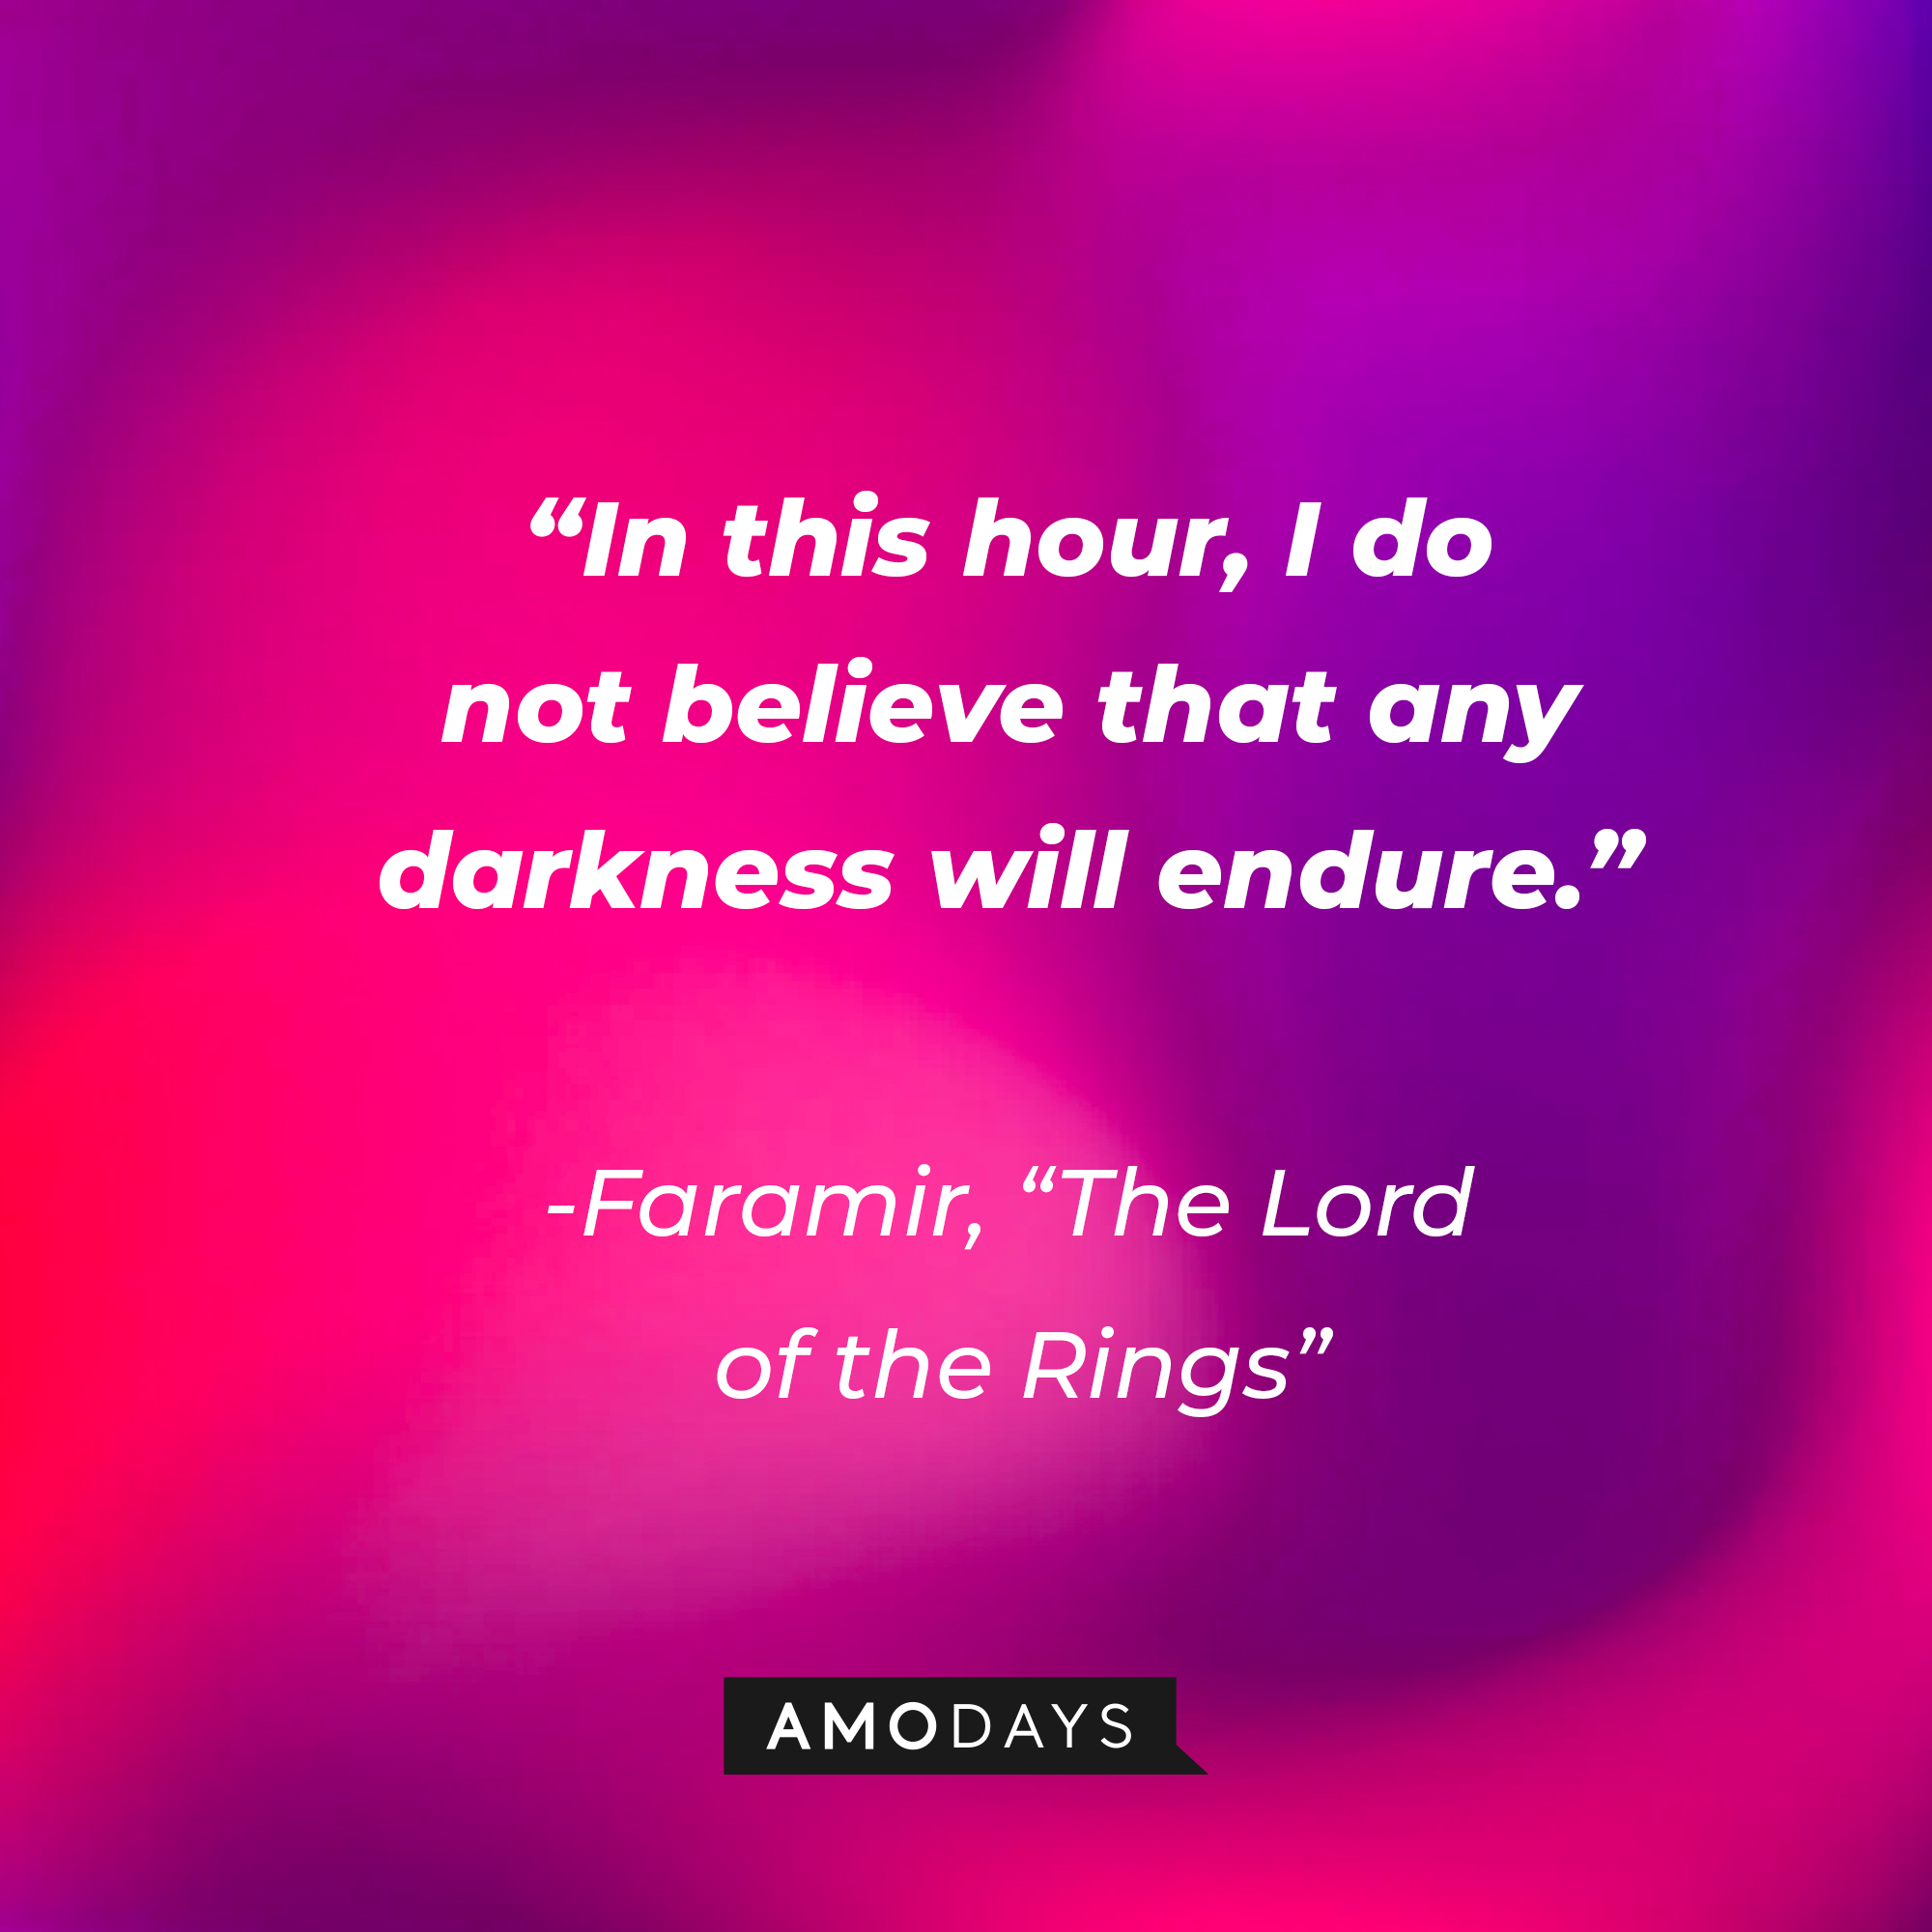 Faramir's quote from "The Lord of the Rings": "In this hour, I do not believe that any darkness will endure." | Source: AmoDays